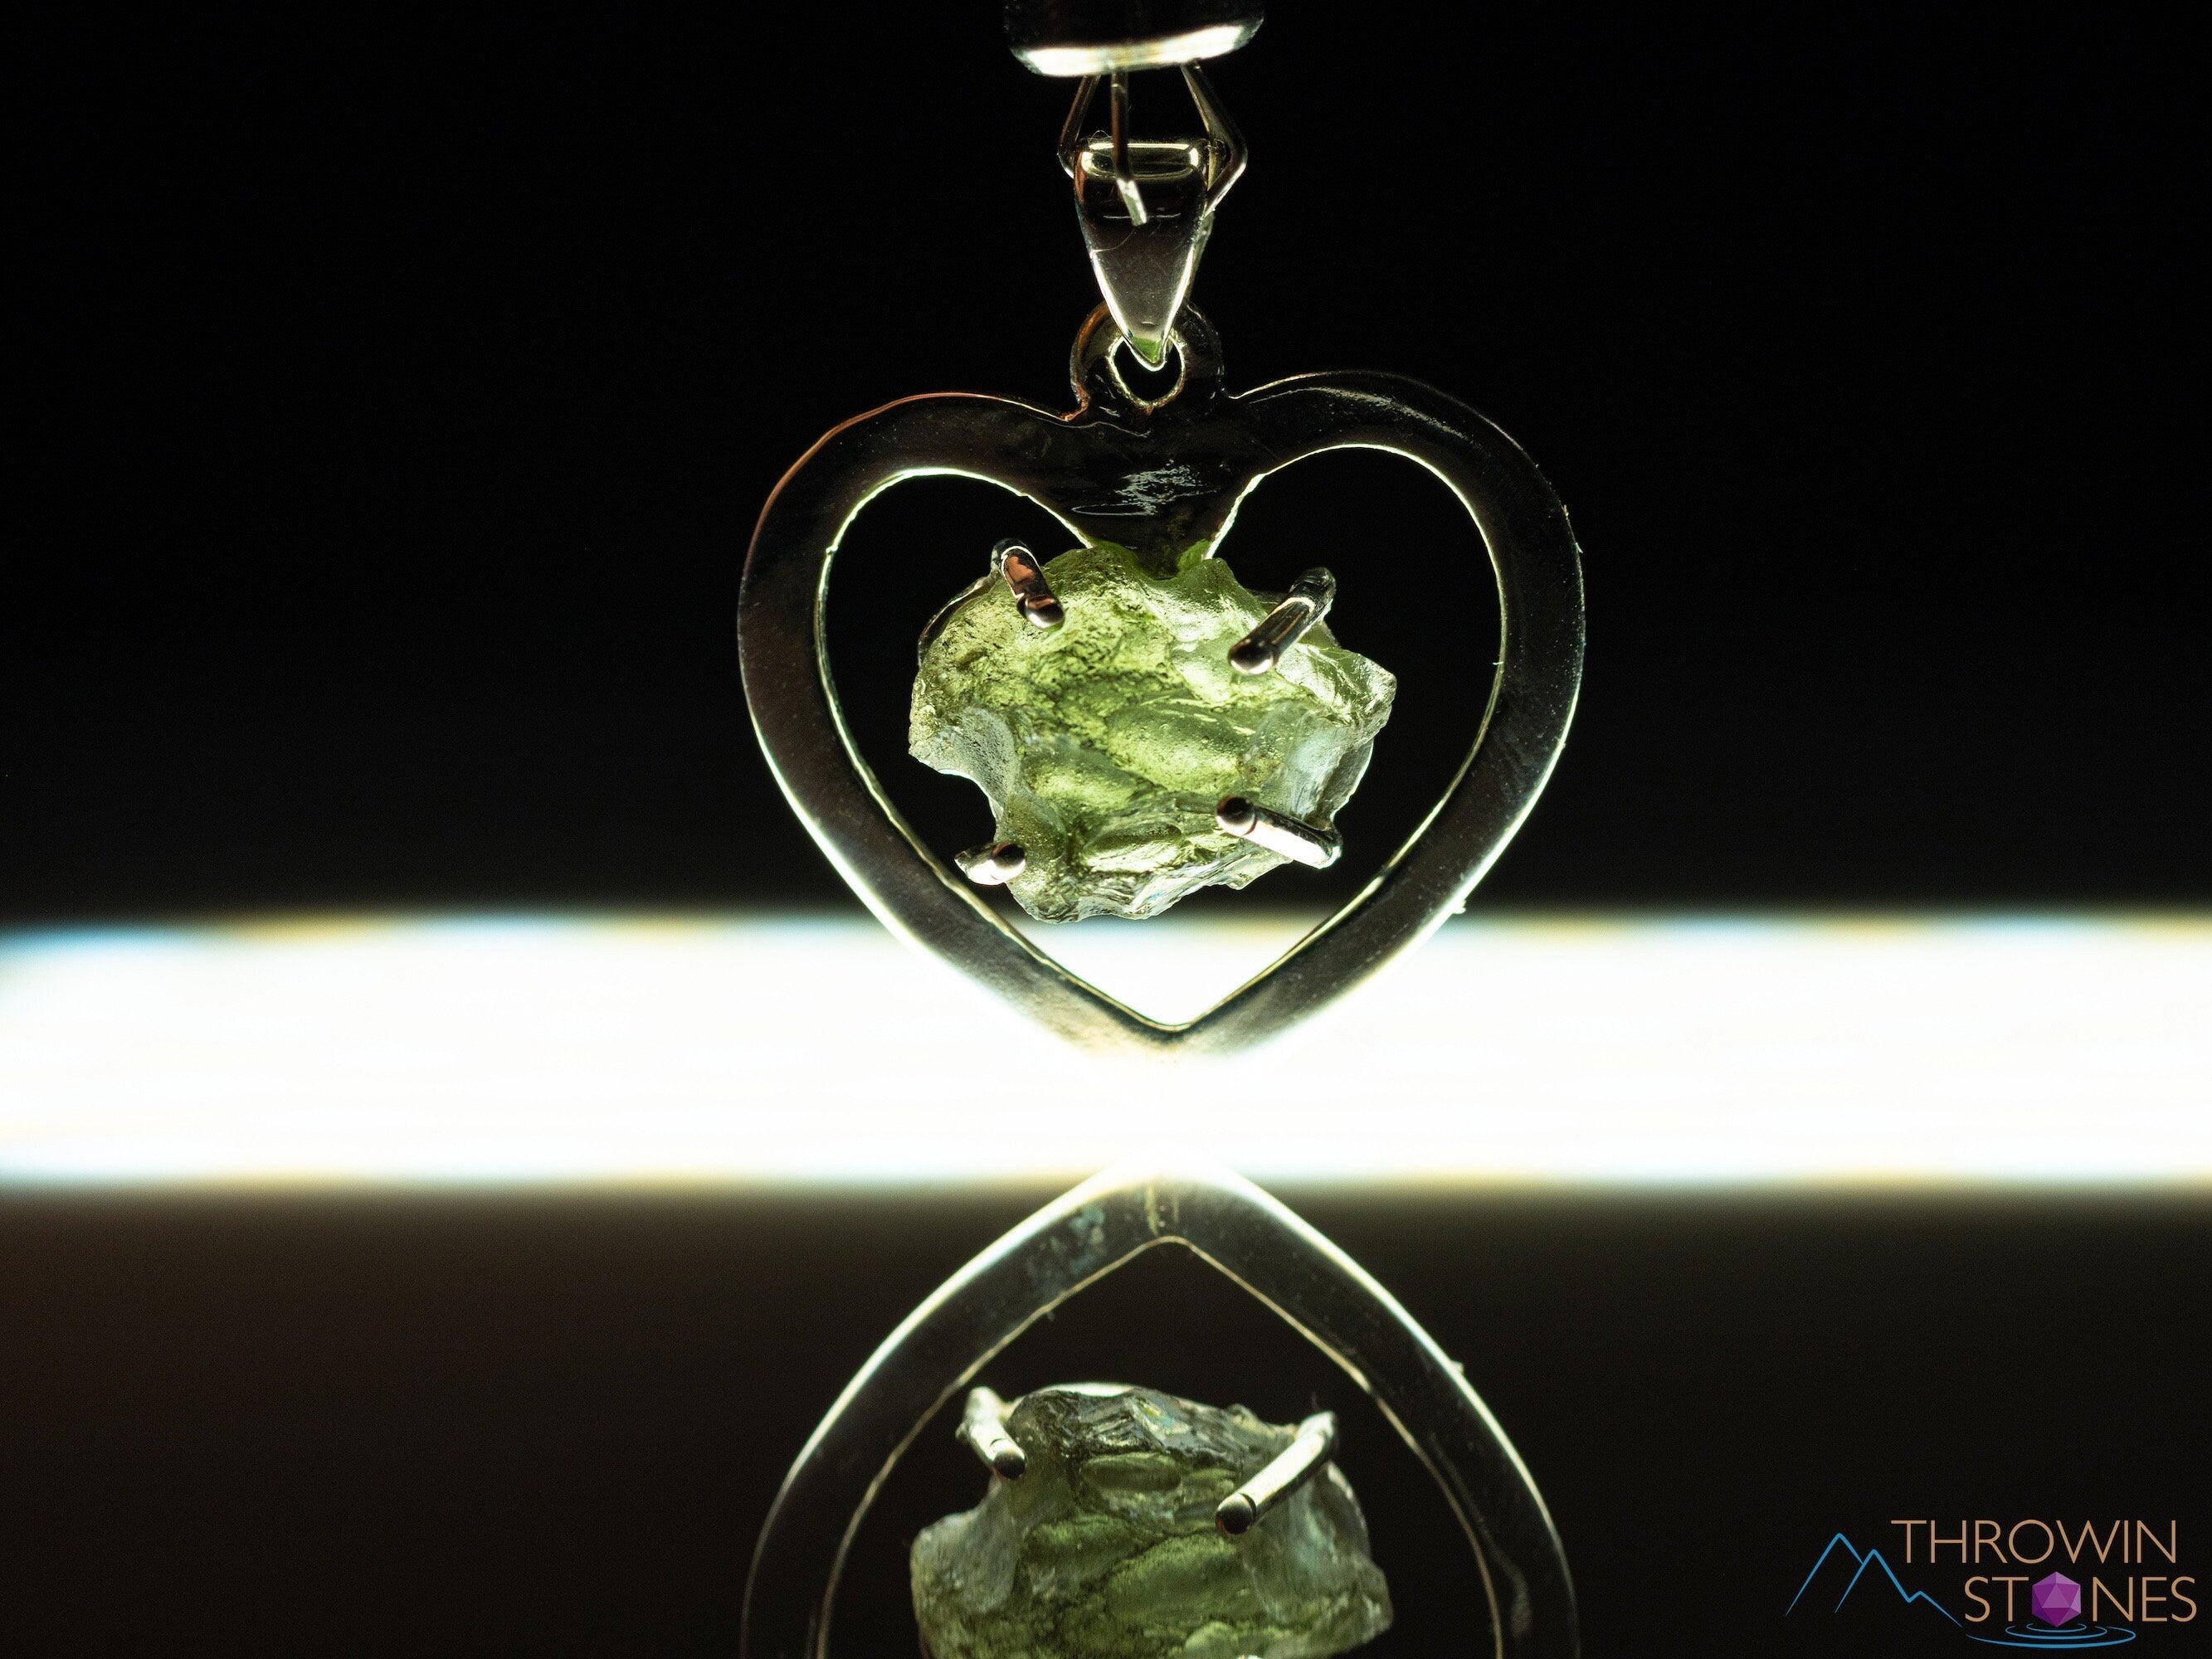 Sterling Silver Necklace With Moldavite - 3×2×1 cm - 15 g - (1) - Catawiki